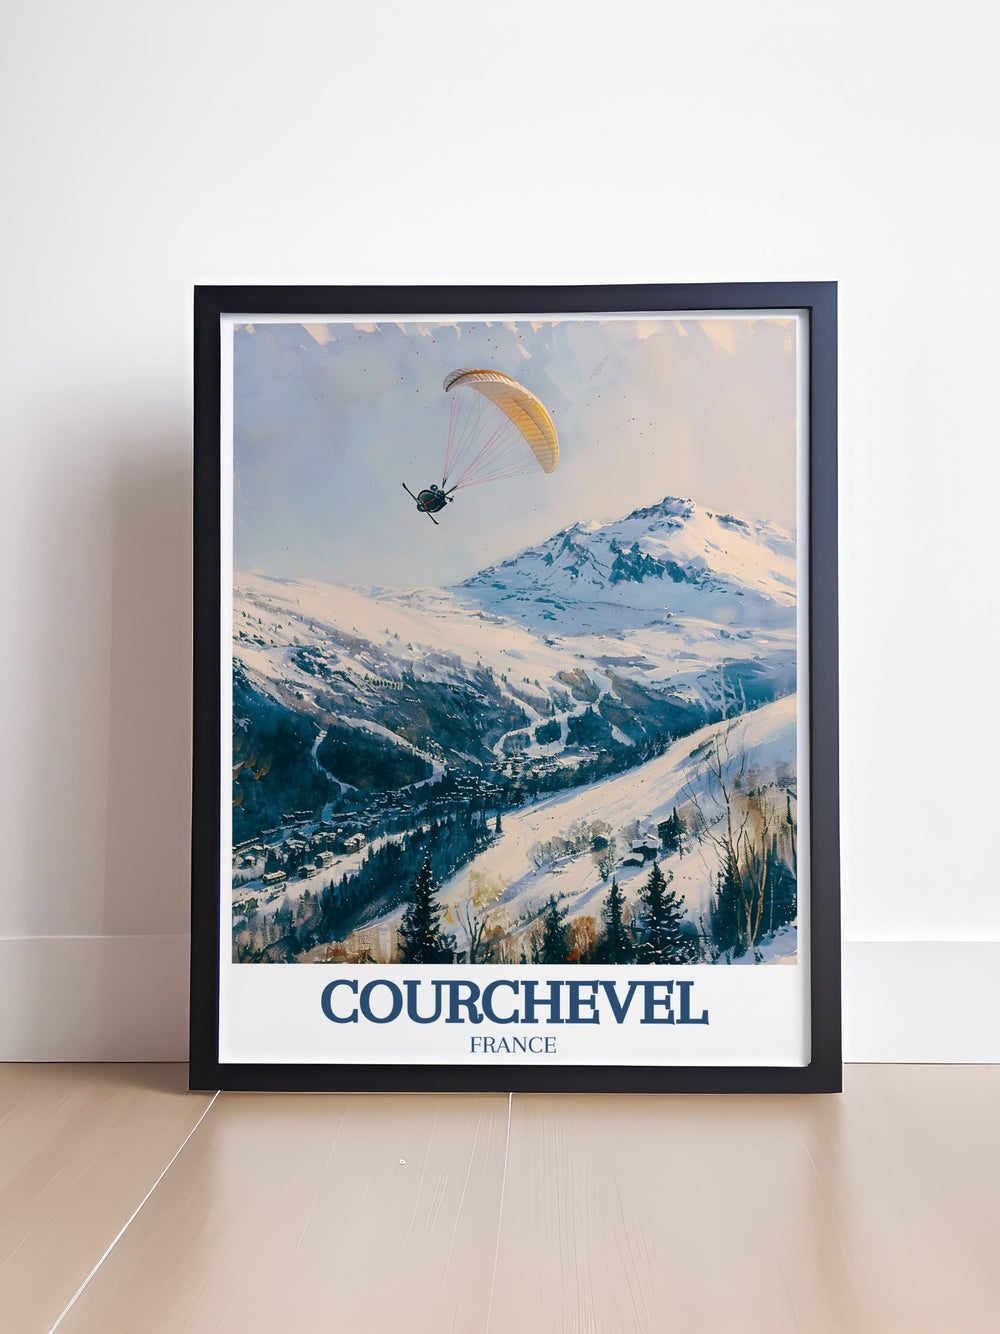 Illustrated with care, this travel poster brings to life the thrilling slopes of Courchevel and the scenic vistas of La Saulire, ideal for enhancing any room with Frances alpine charm.